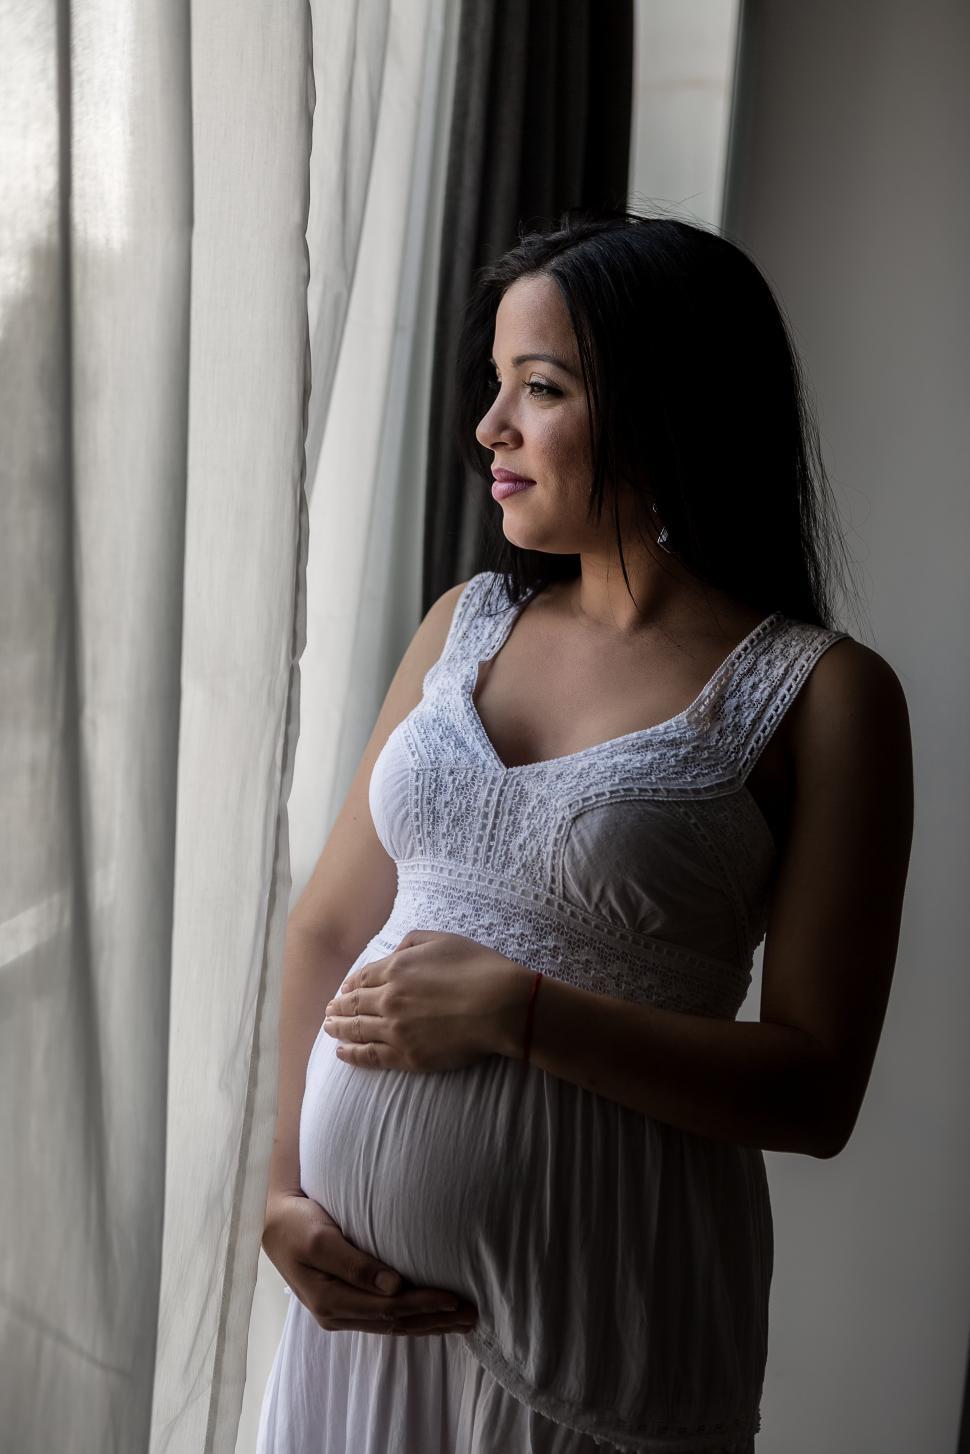 Free Image of Pregnant woman looking out window, hands on belly 